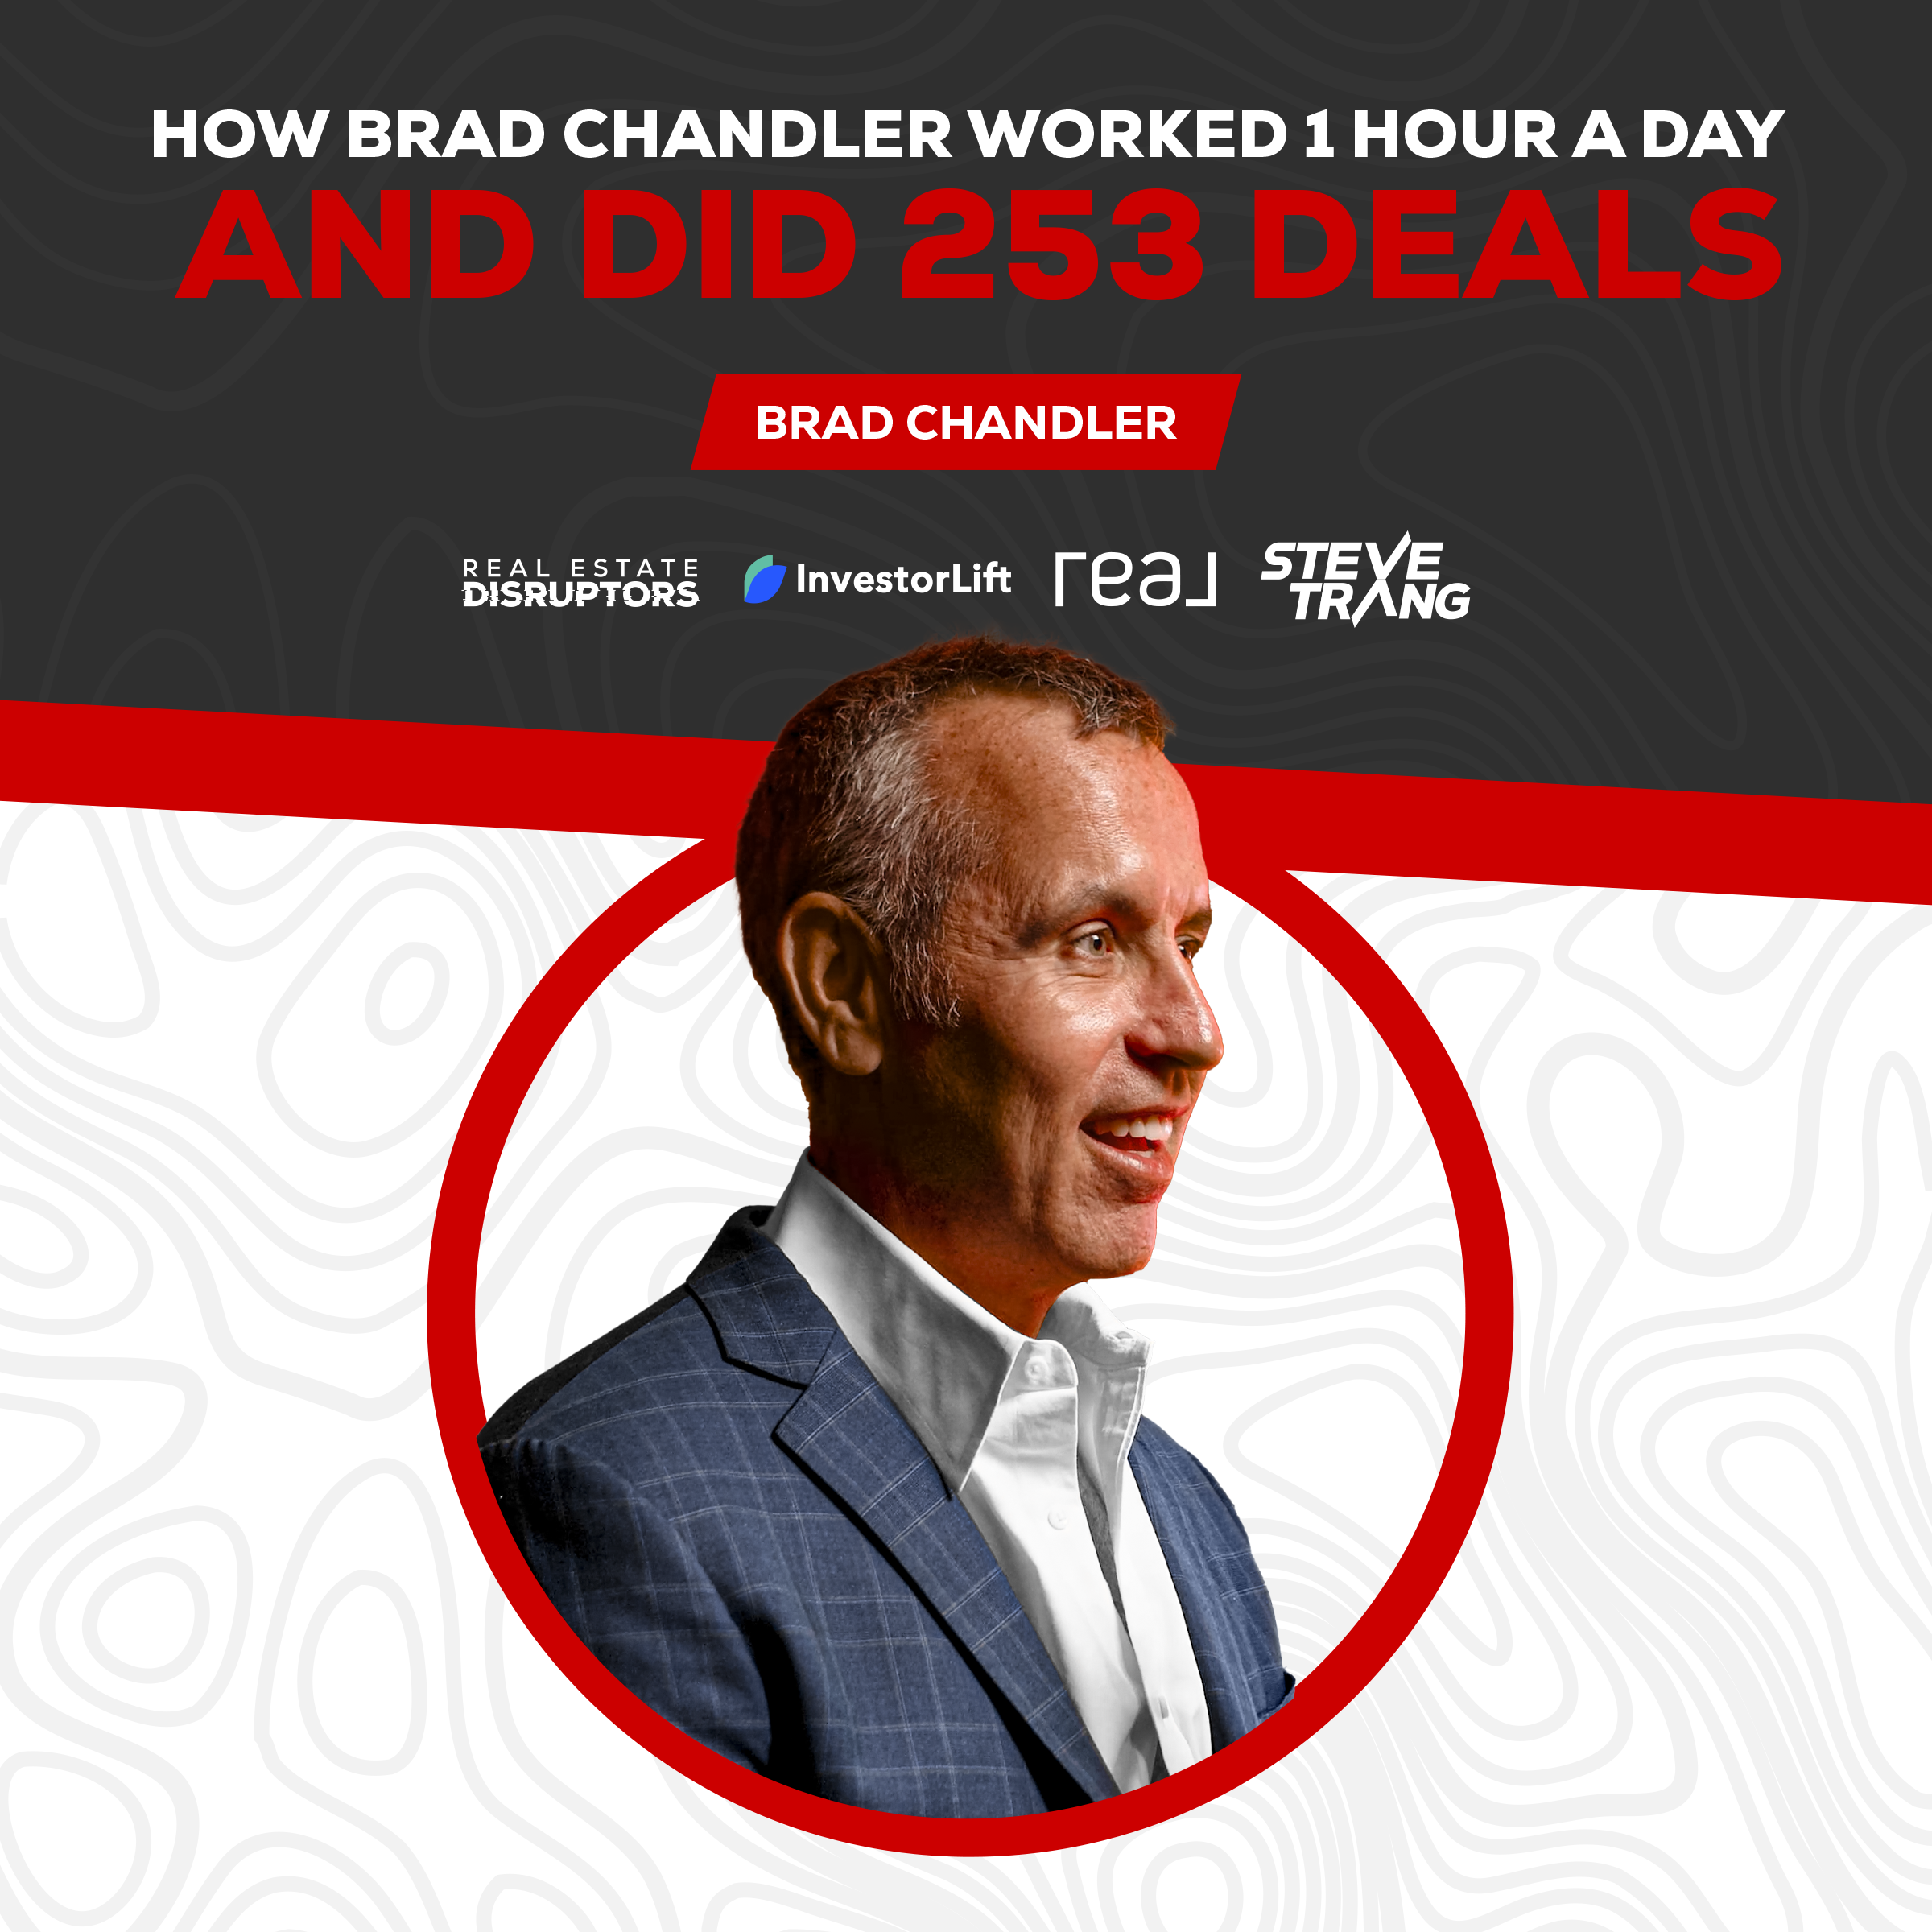 How Brad Chandler Did 253 Deals Last Year Only Working an Hour a Day